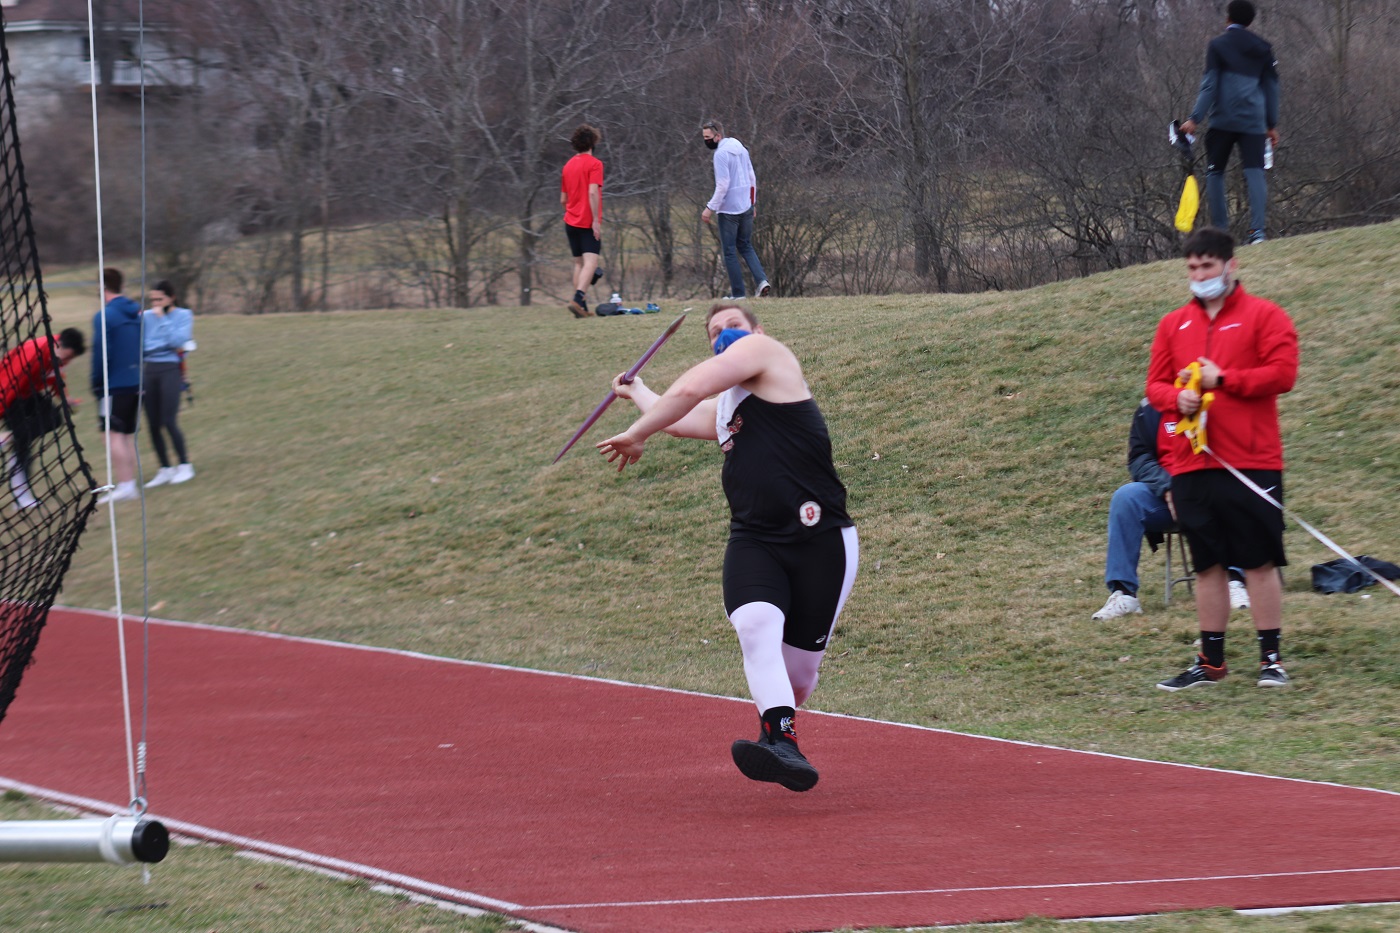 Eric Bugg competes in the javelin